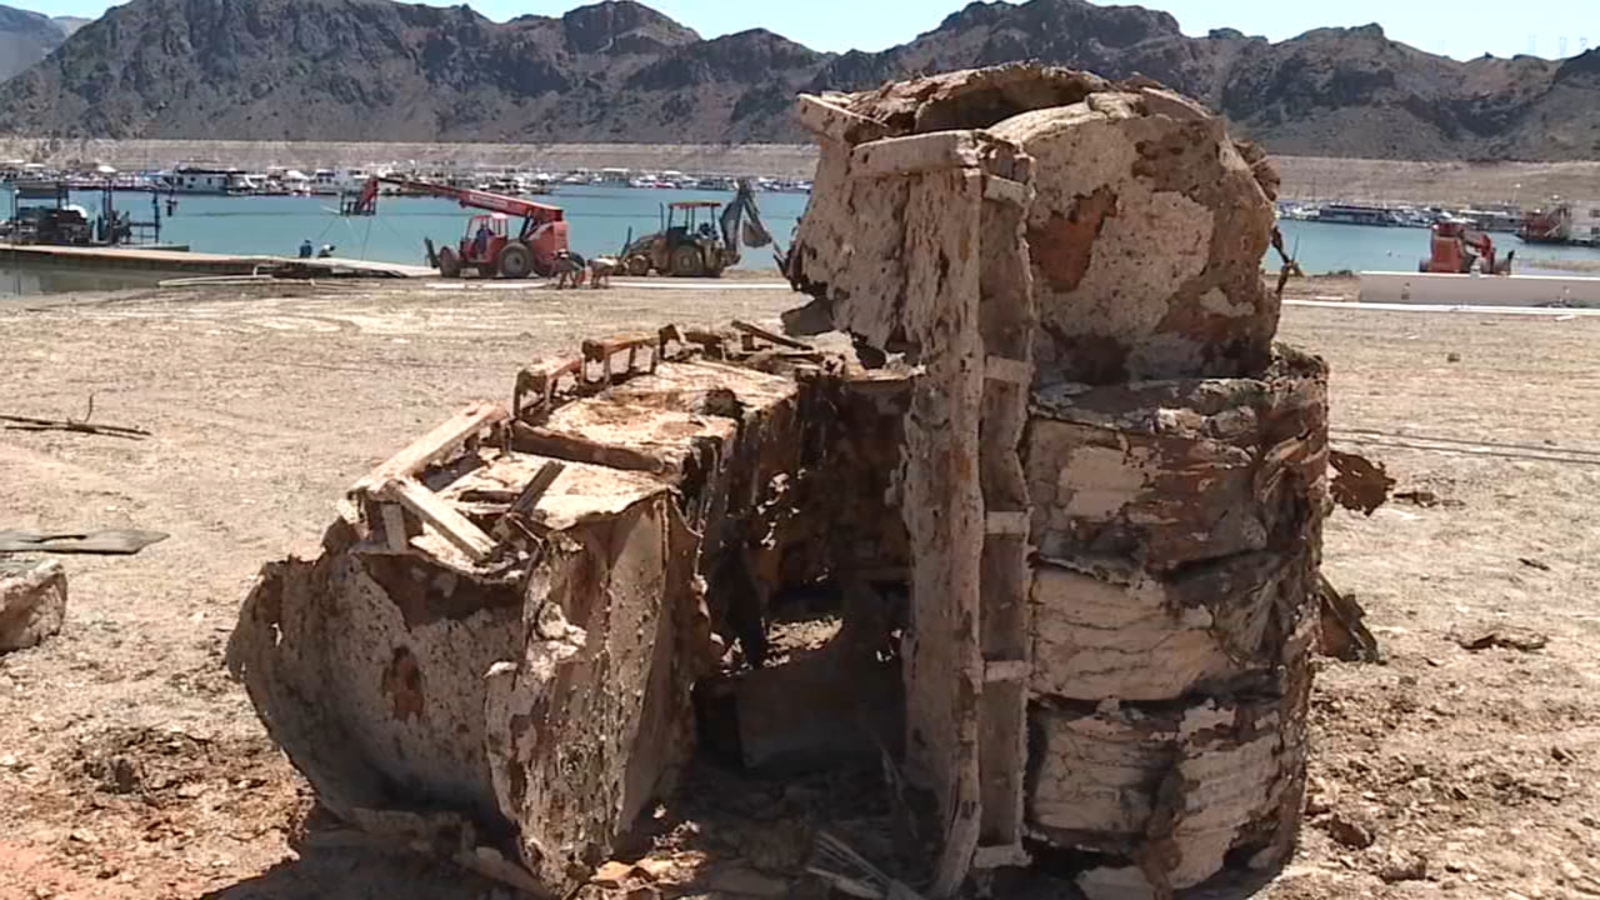 Human remains found at Lake Mead | Read